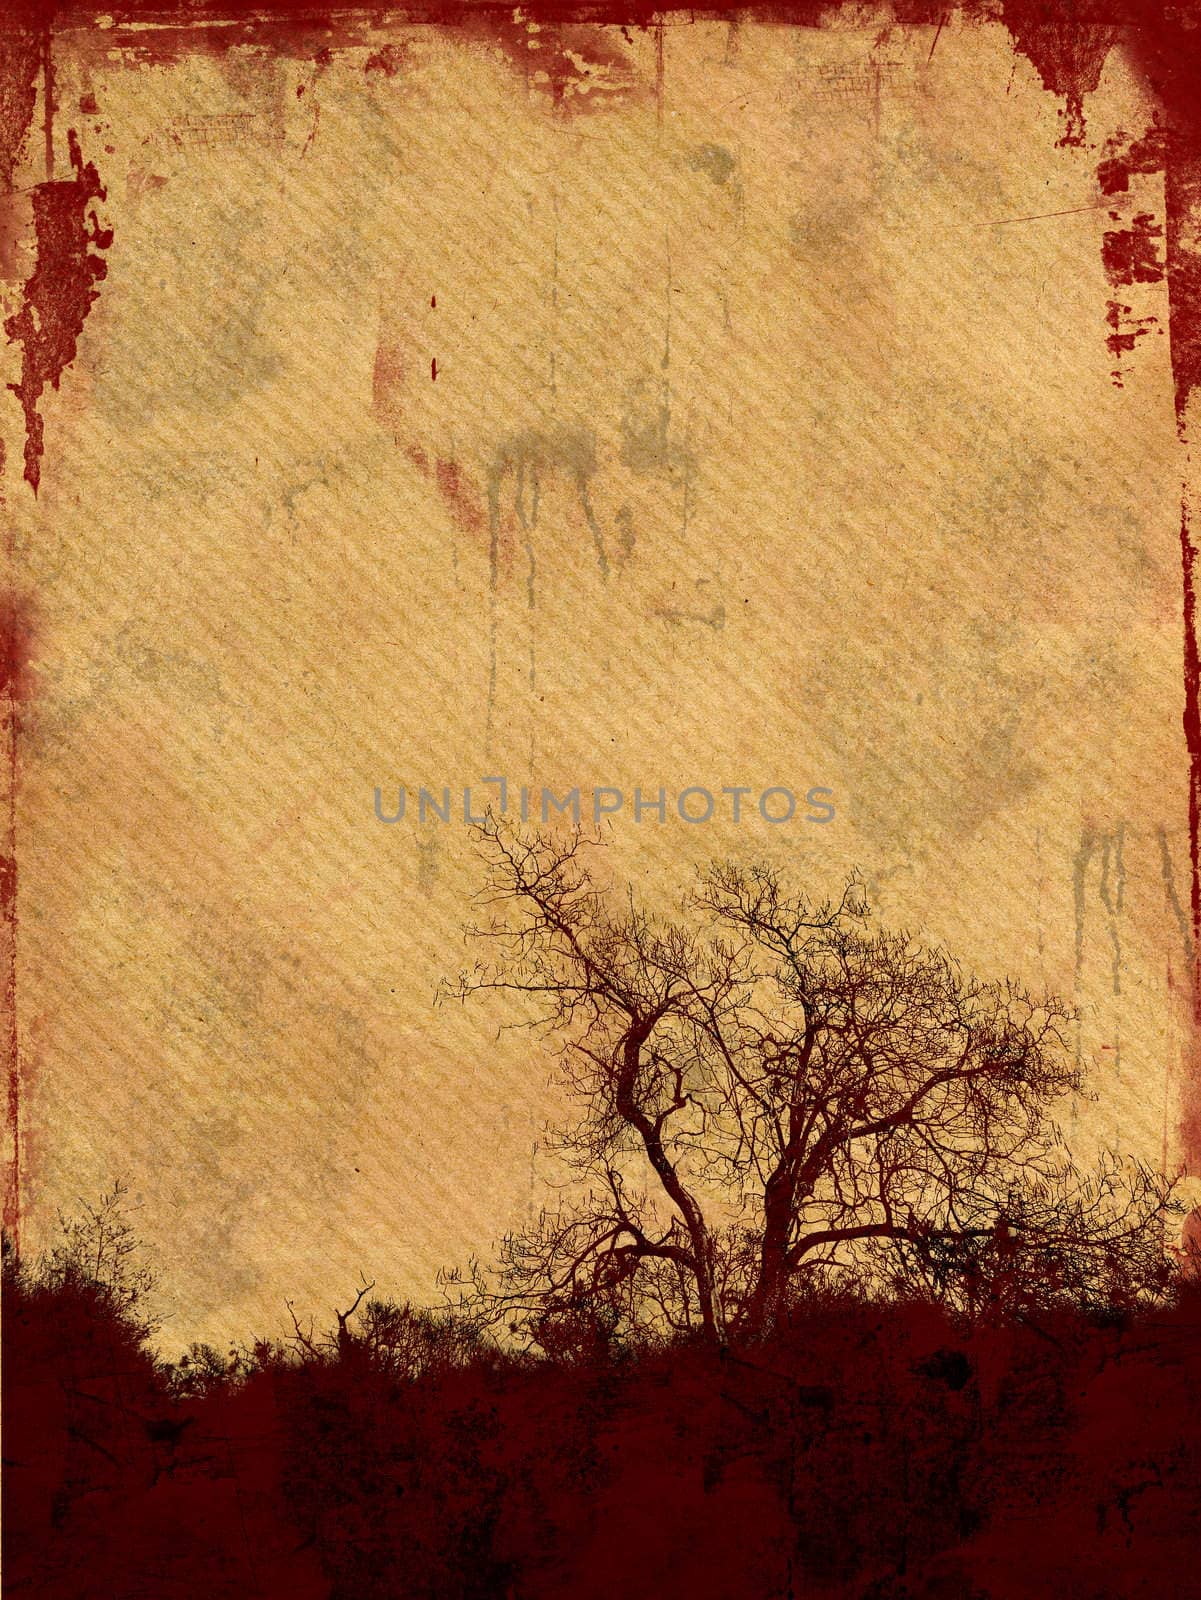 Grunge frame with tree silhouette on aged paper background  with space for your text